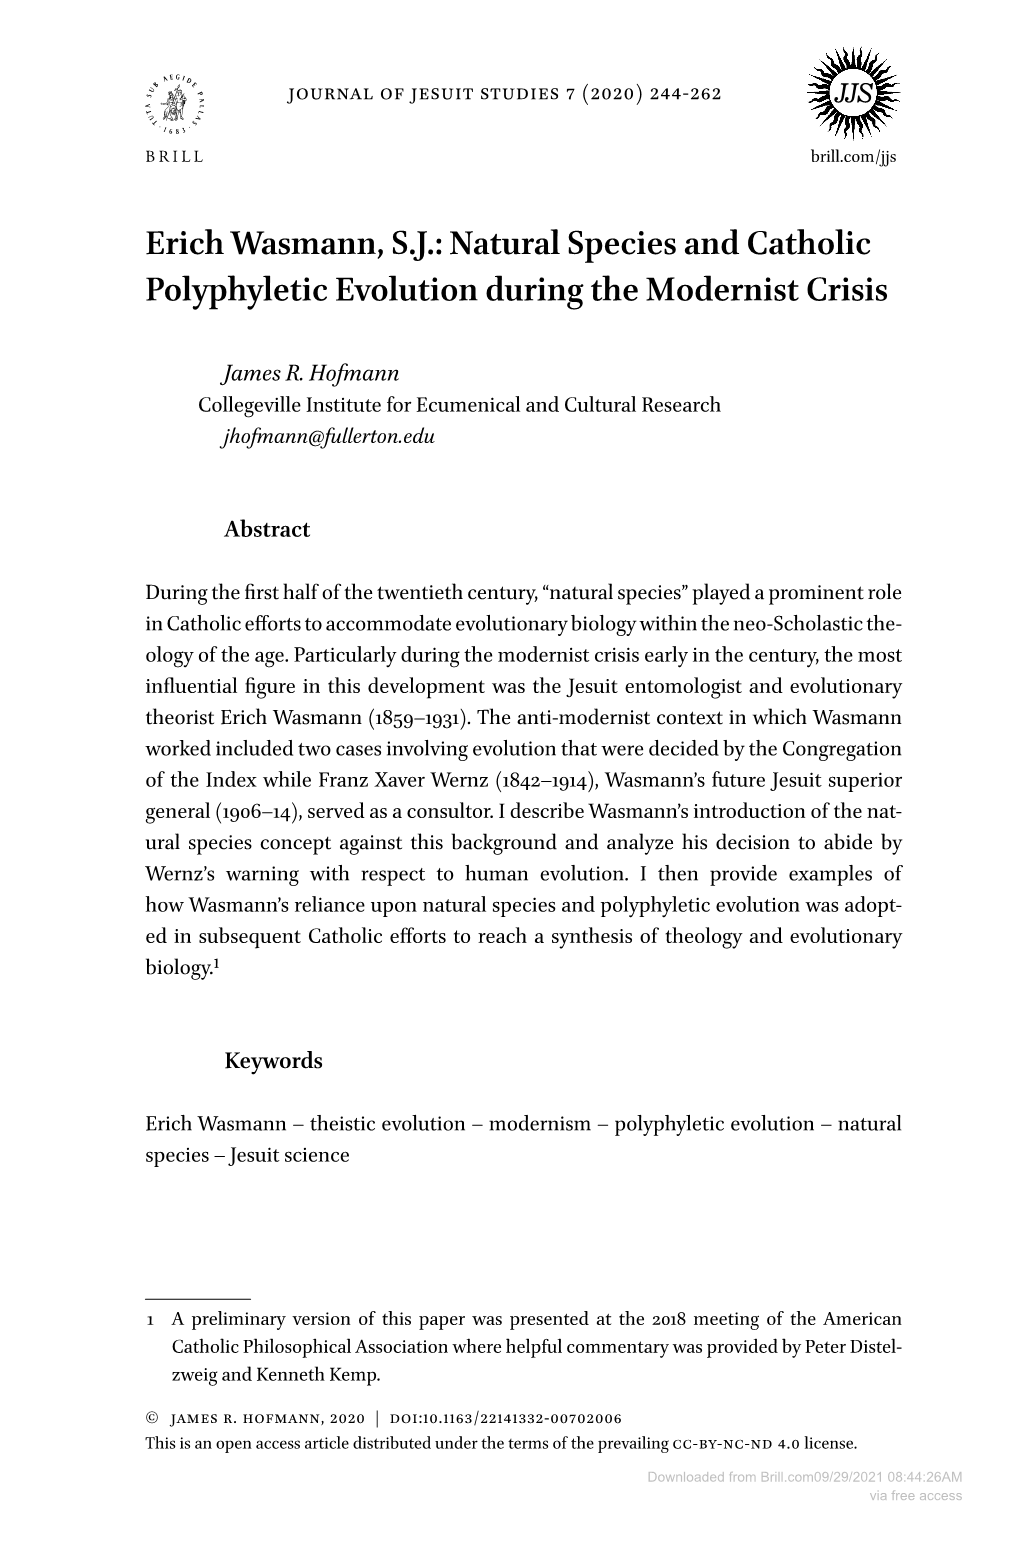 Erich Wasmann, S.J.: Natural Species and Catholic Polyphyletic Evolution During the Modernist Crisis